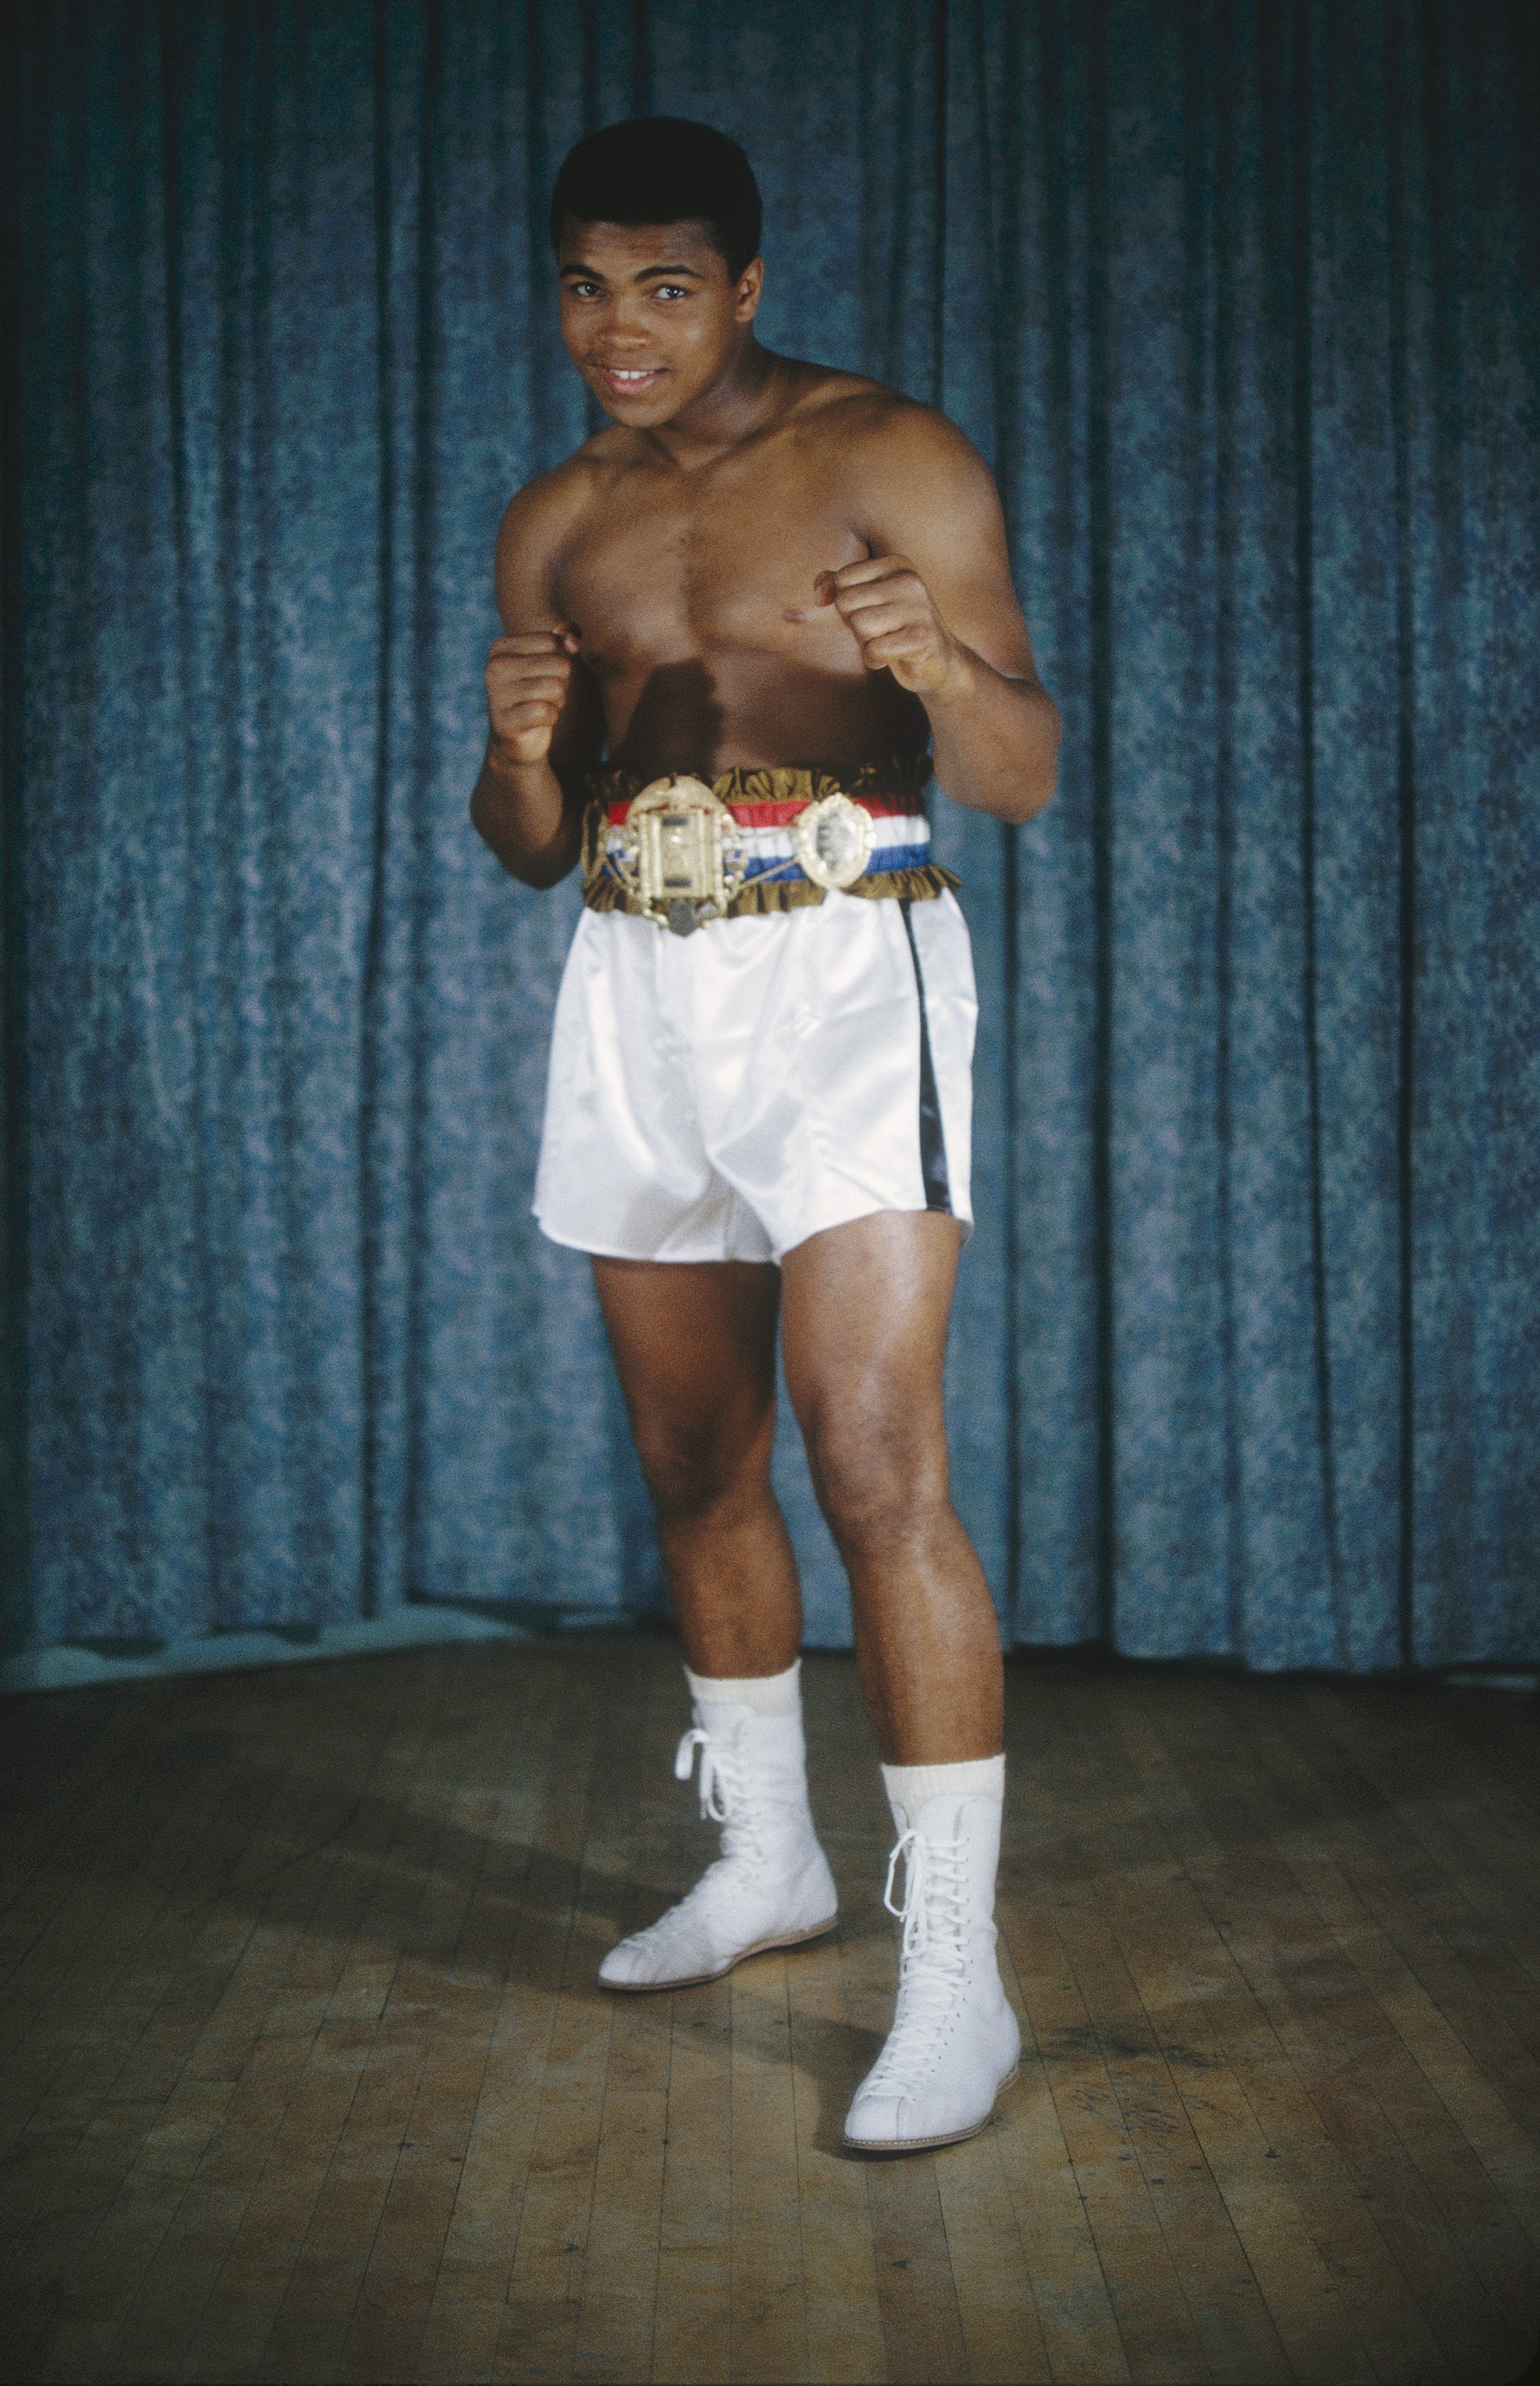  Muhammad Ali poses a portrait in 1964